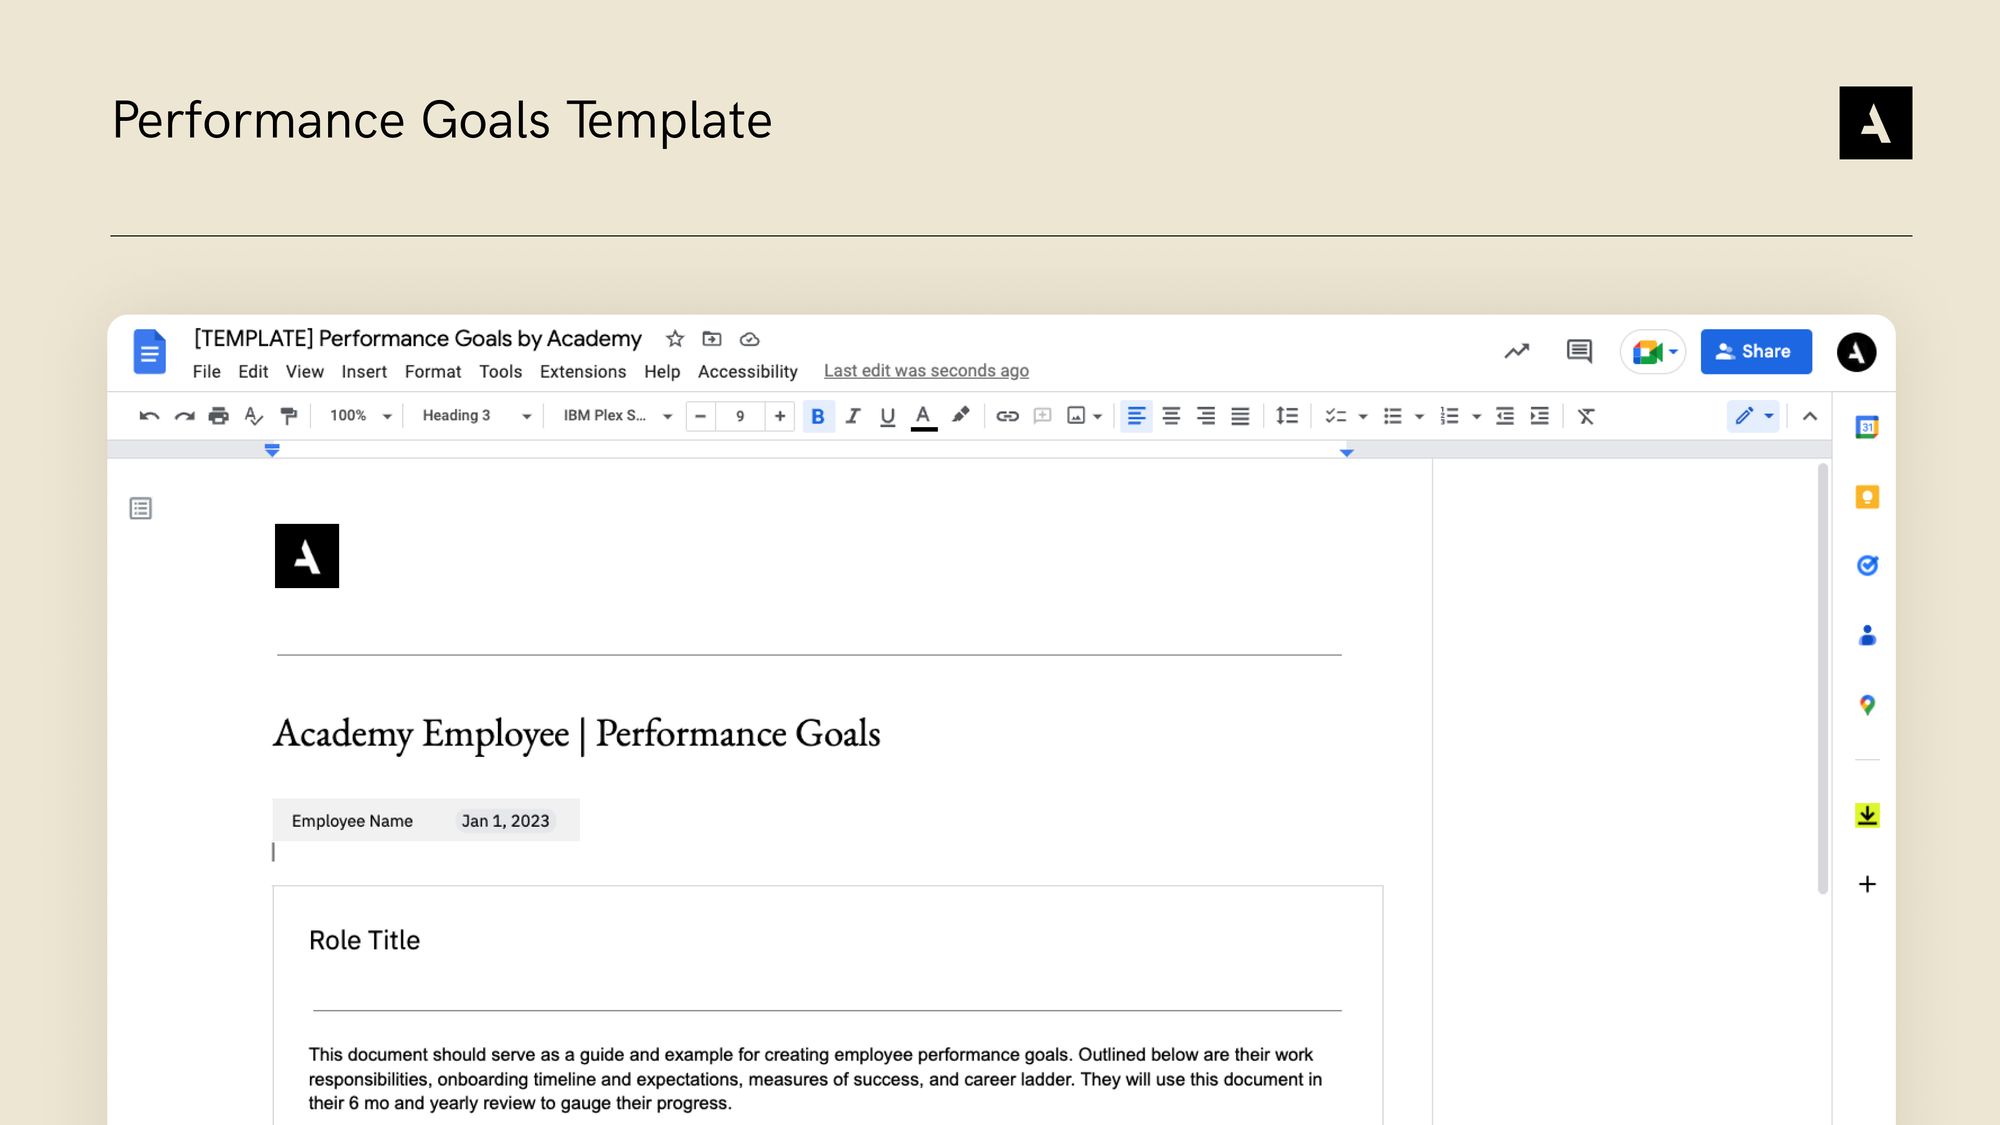 An Image of performance goals template